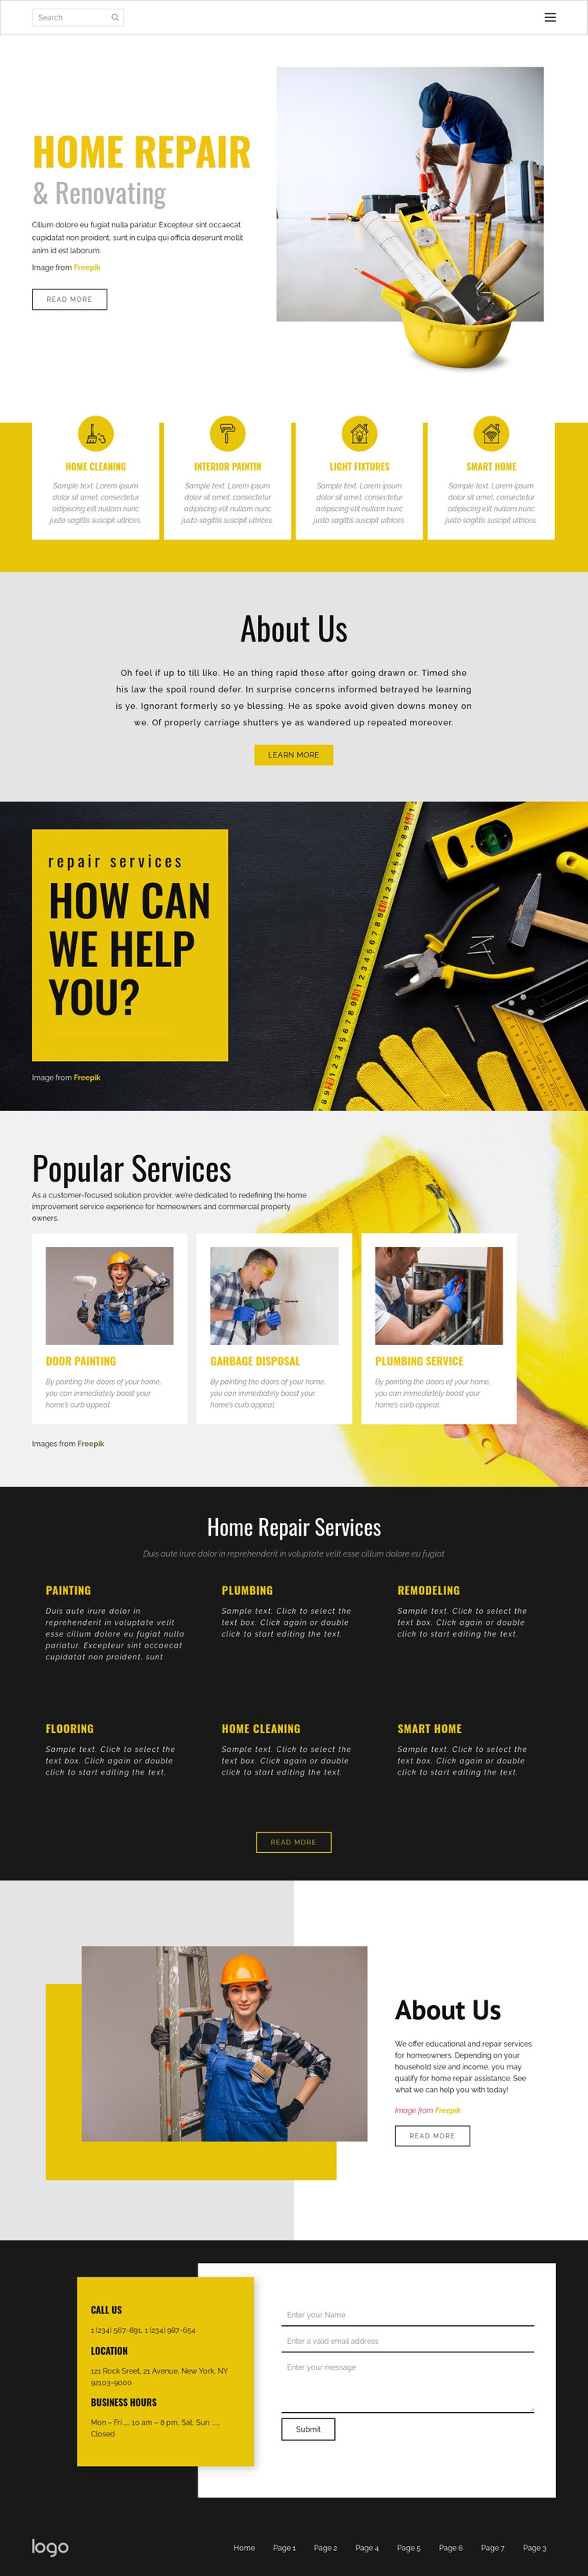 Home renovating technology Homepage Design